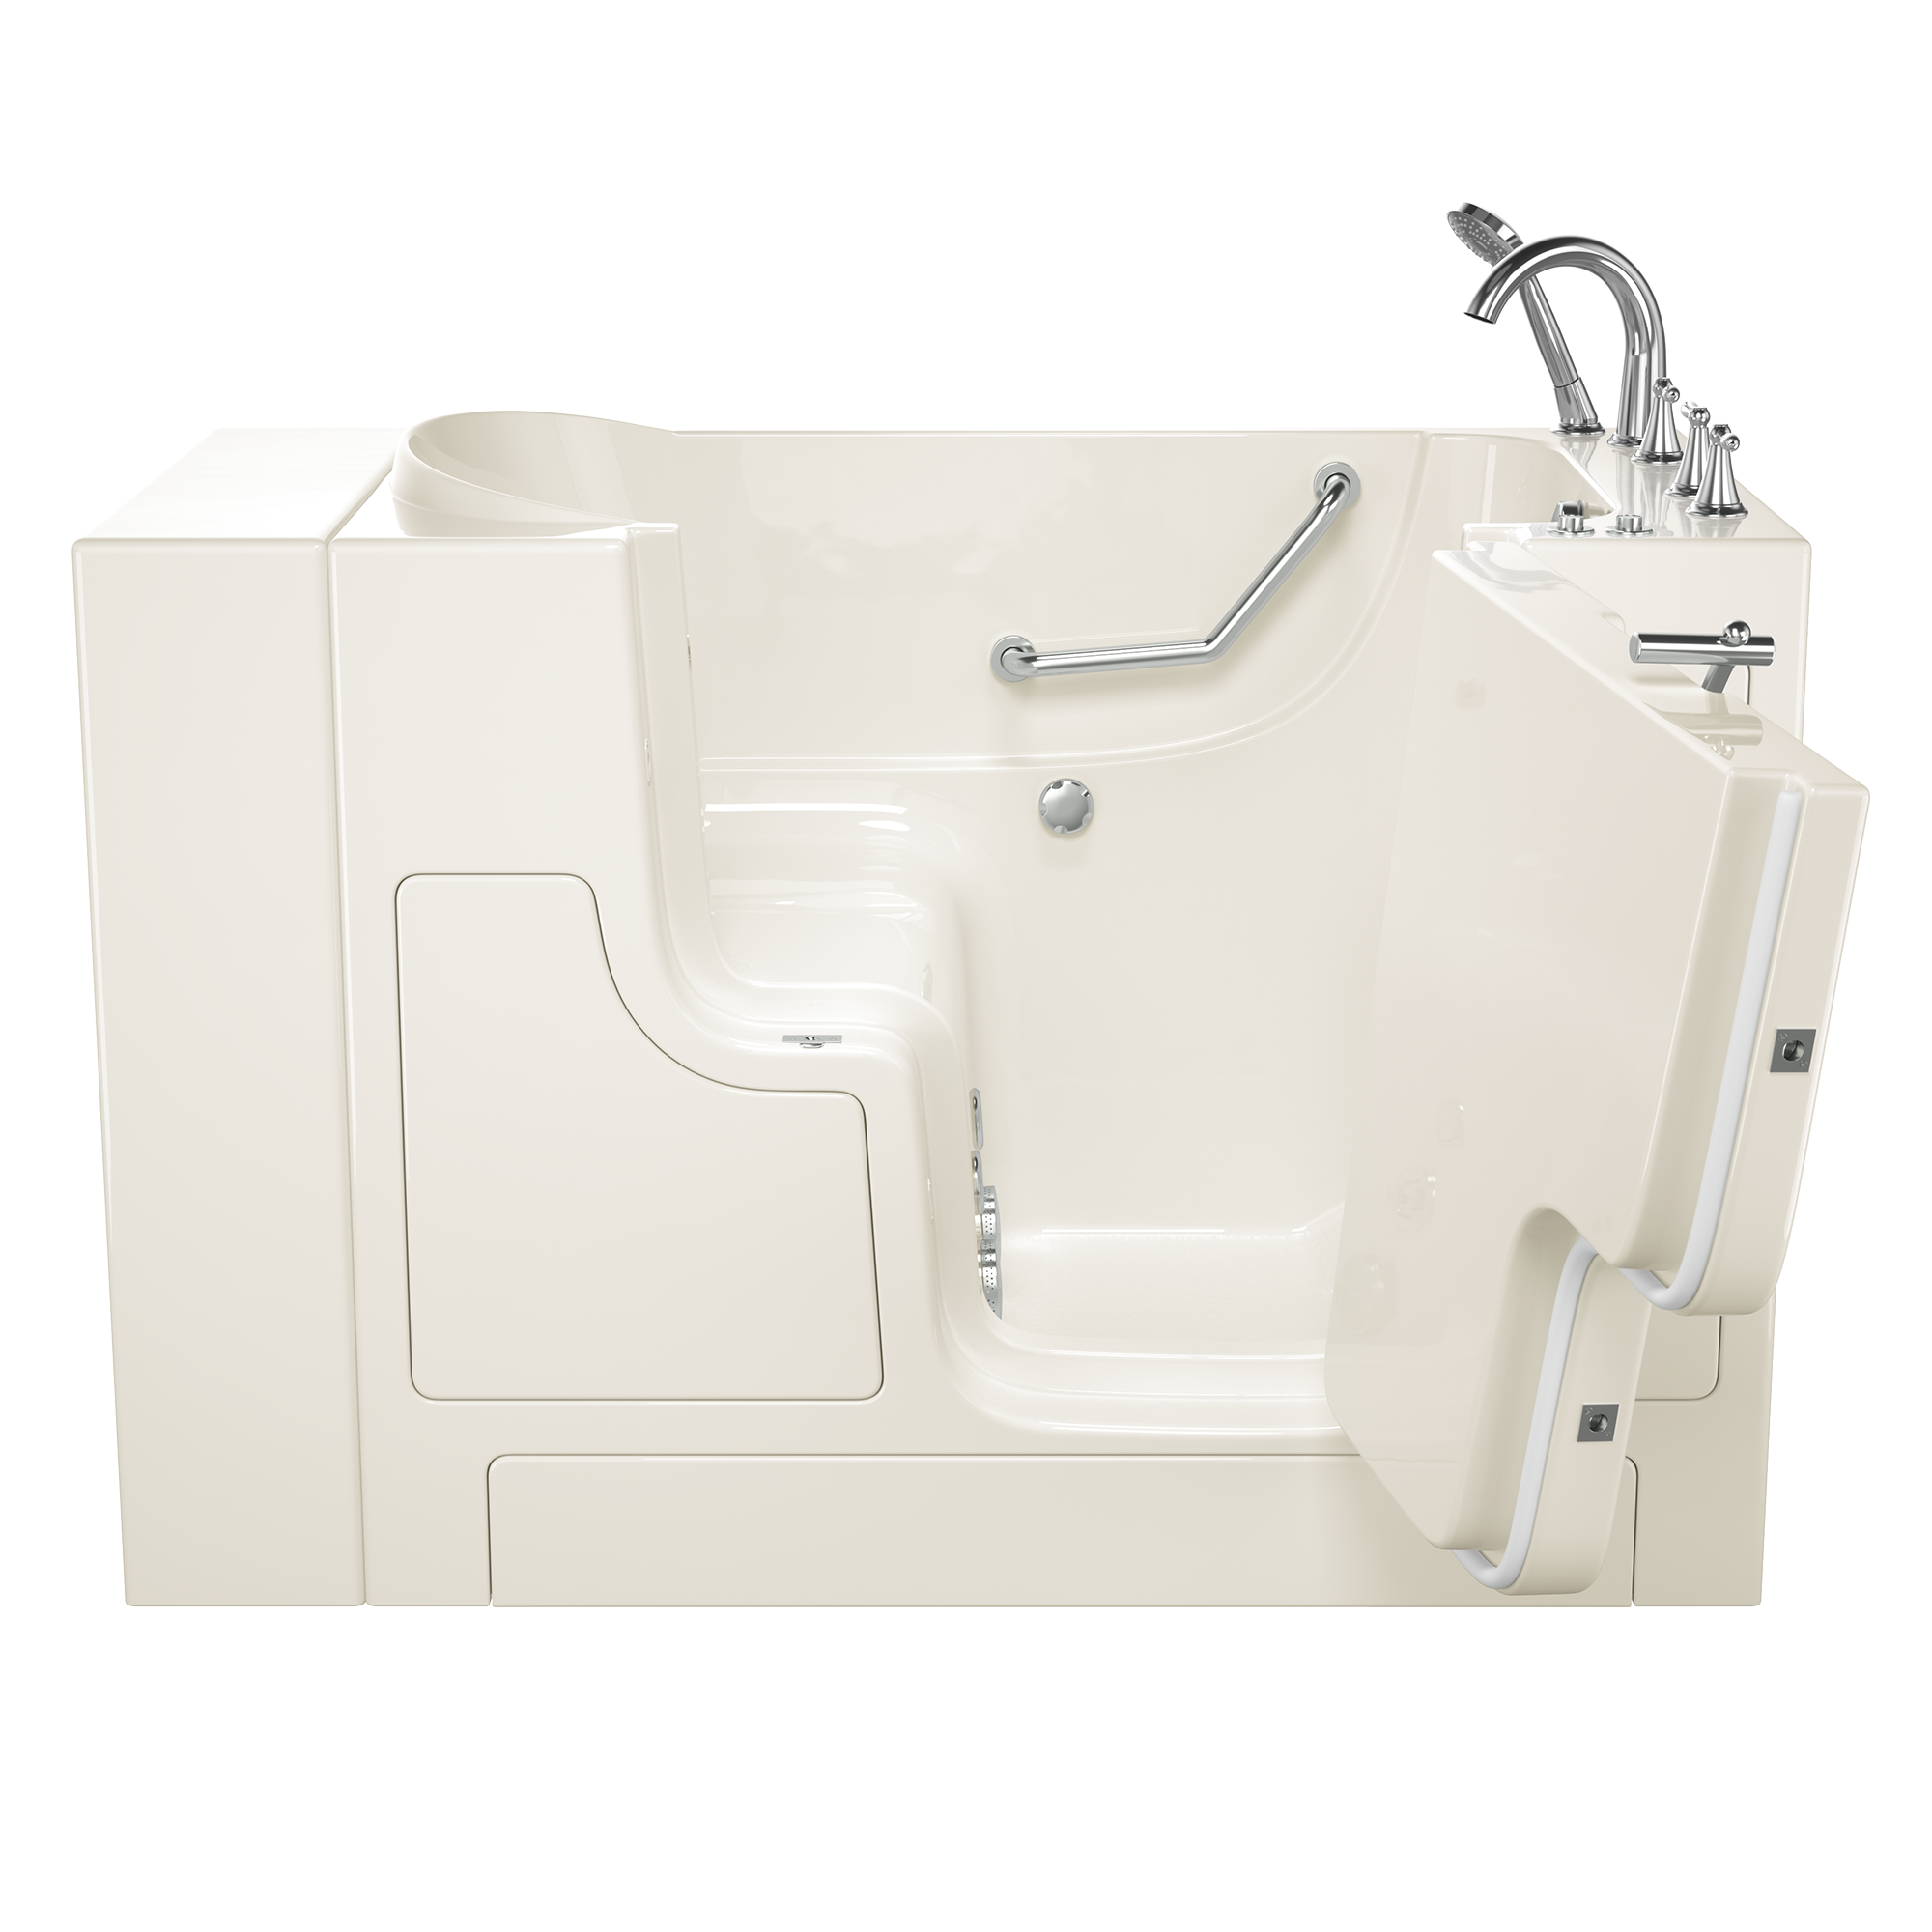 Gelcoat Value Series 30 x 52 -Inch Walk-in Tub With Whirlpool System - Right-Hand Drain With Faucet